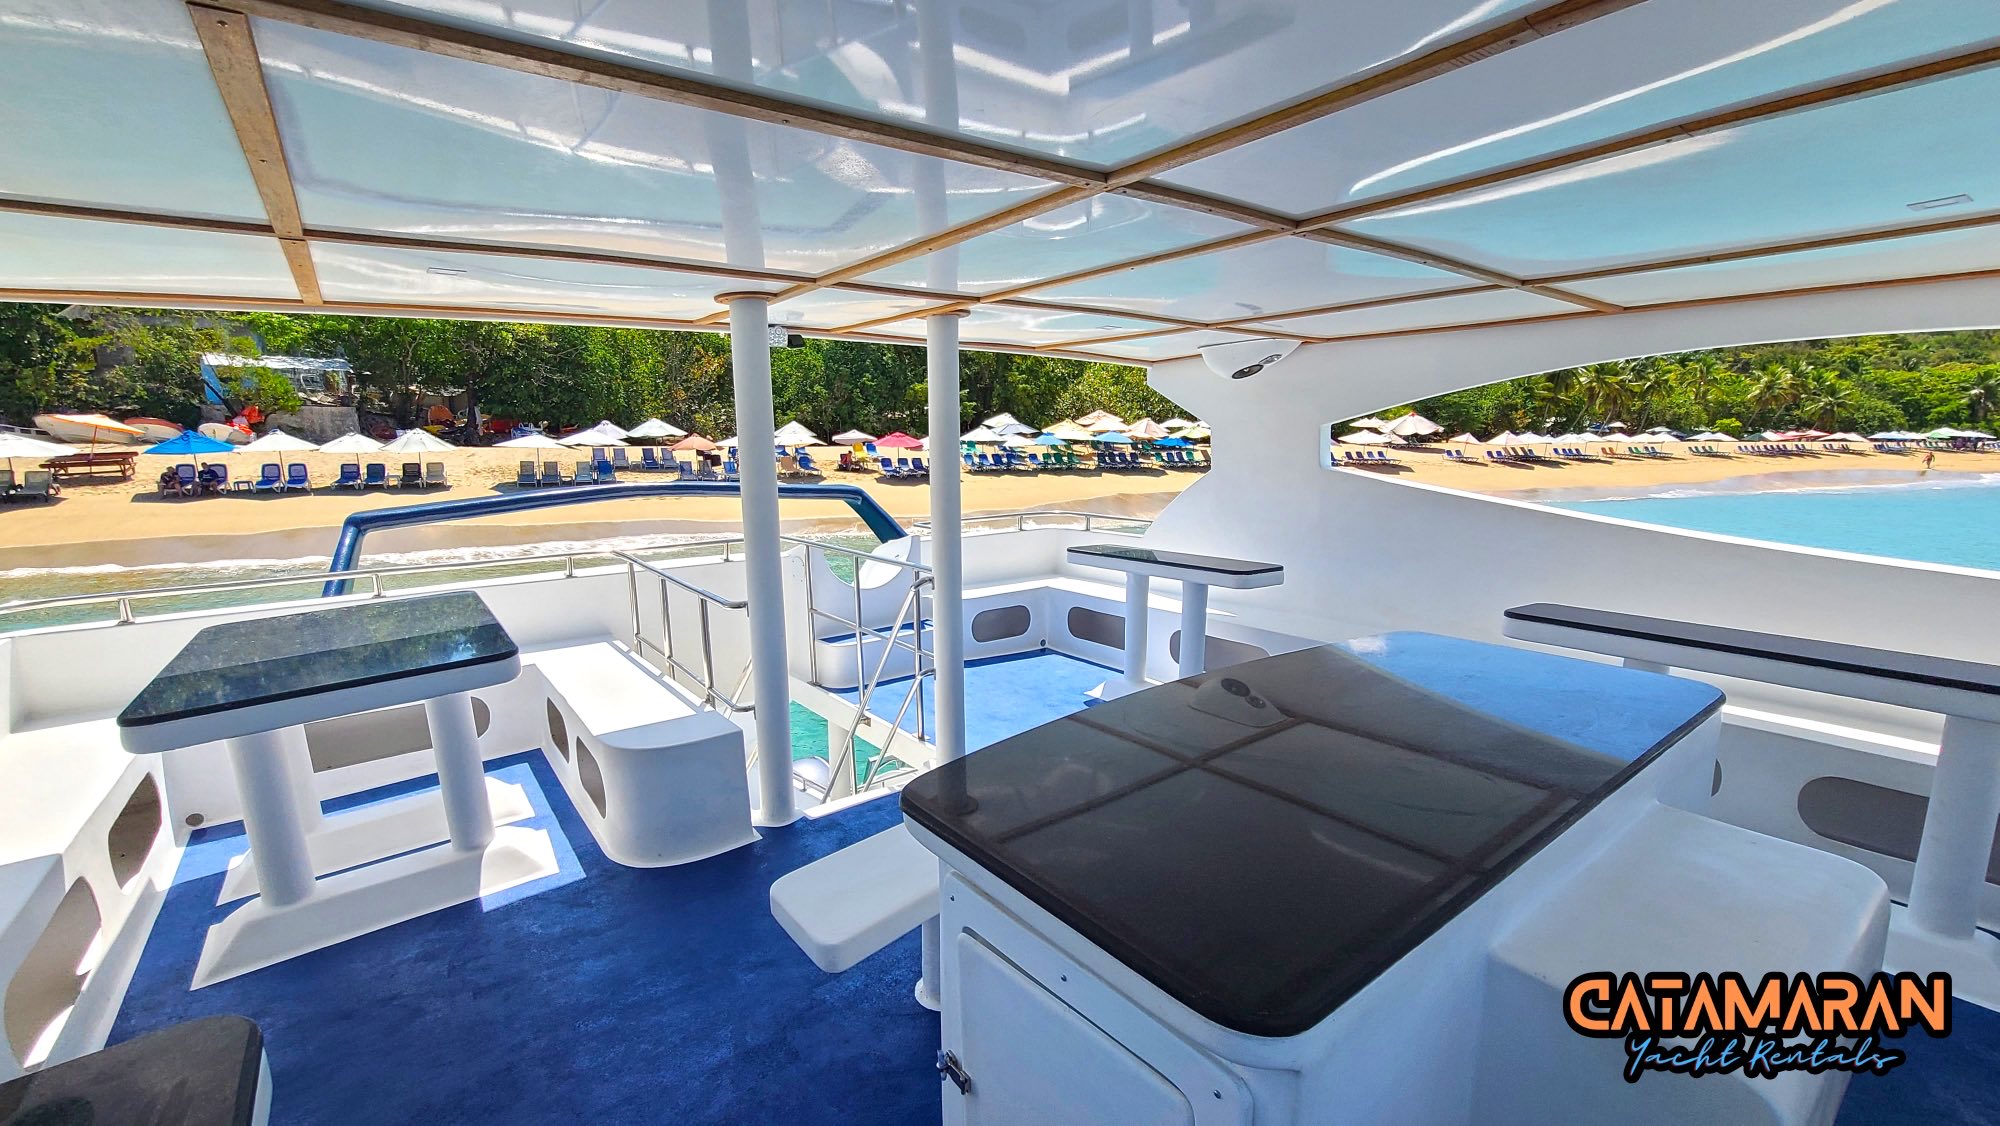 The flybridge deck can accommodate large groups